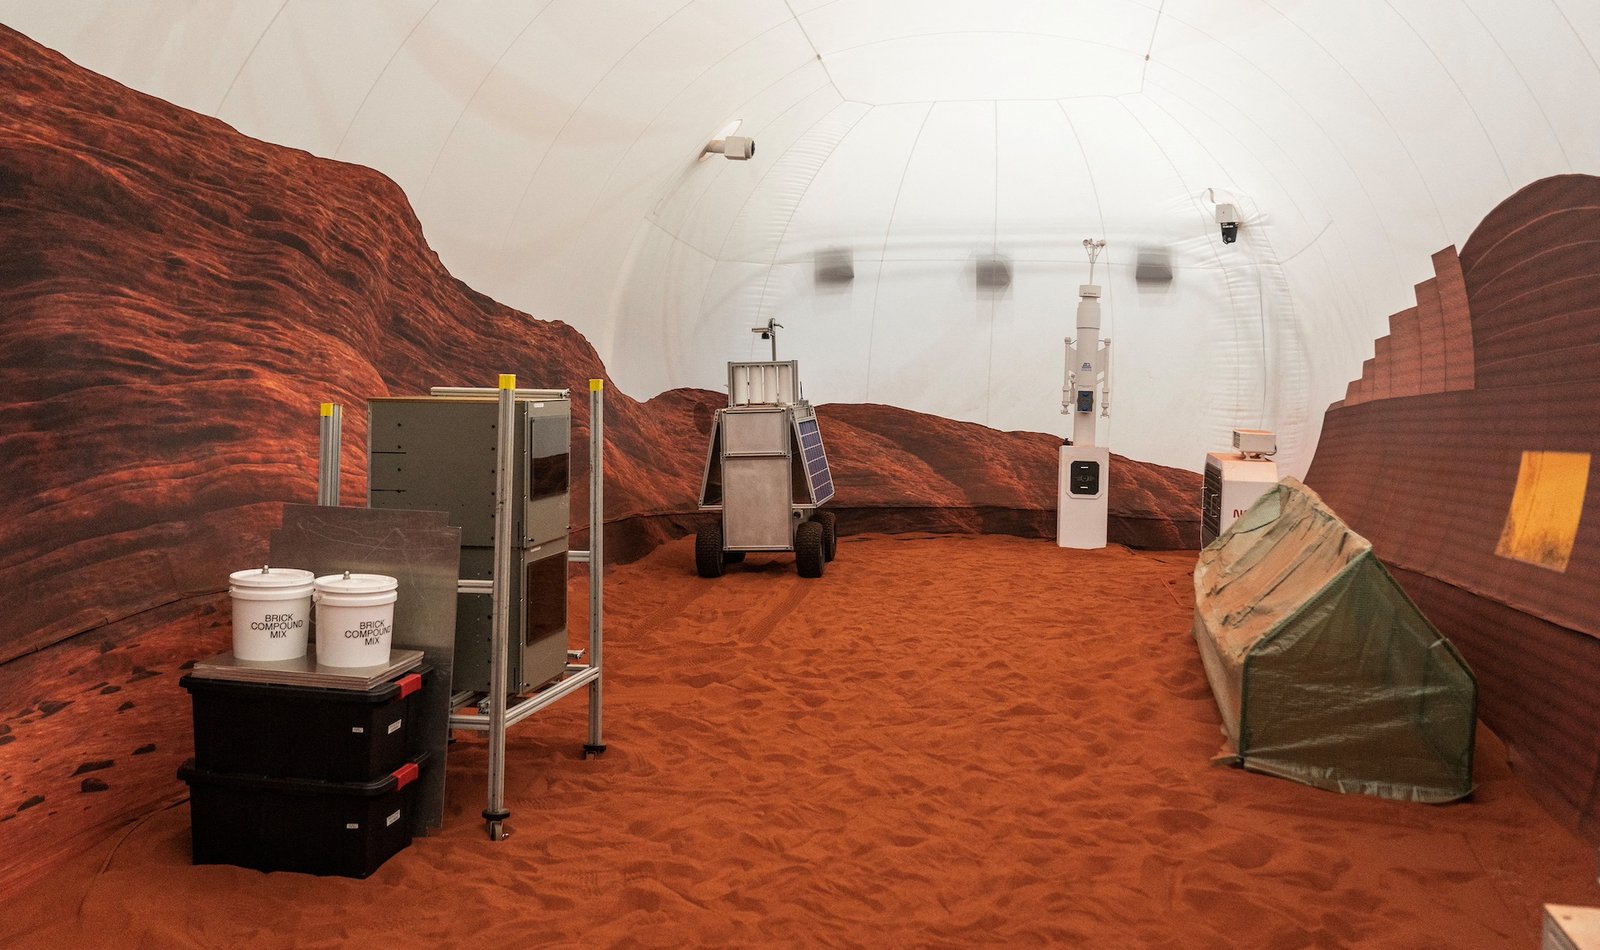 NASA Must Put Me On The Simulated Mars Mission, To Test The Astronauts’ Patience